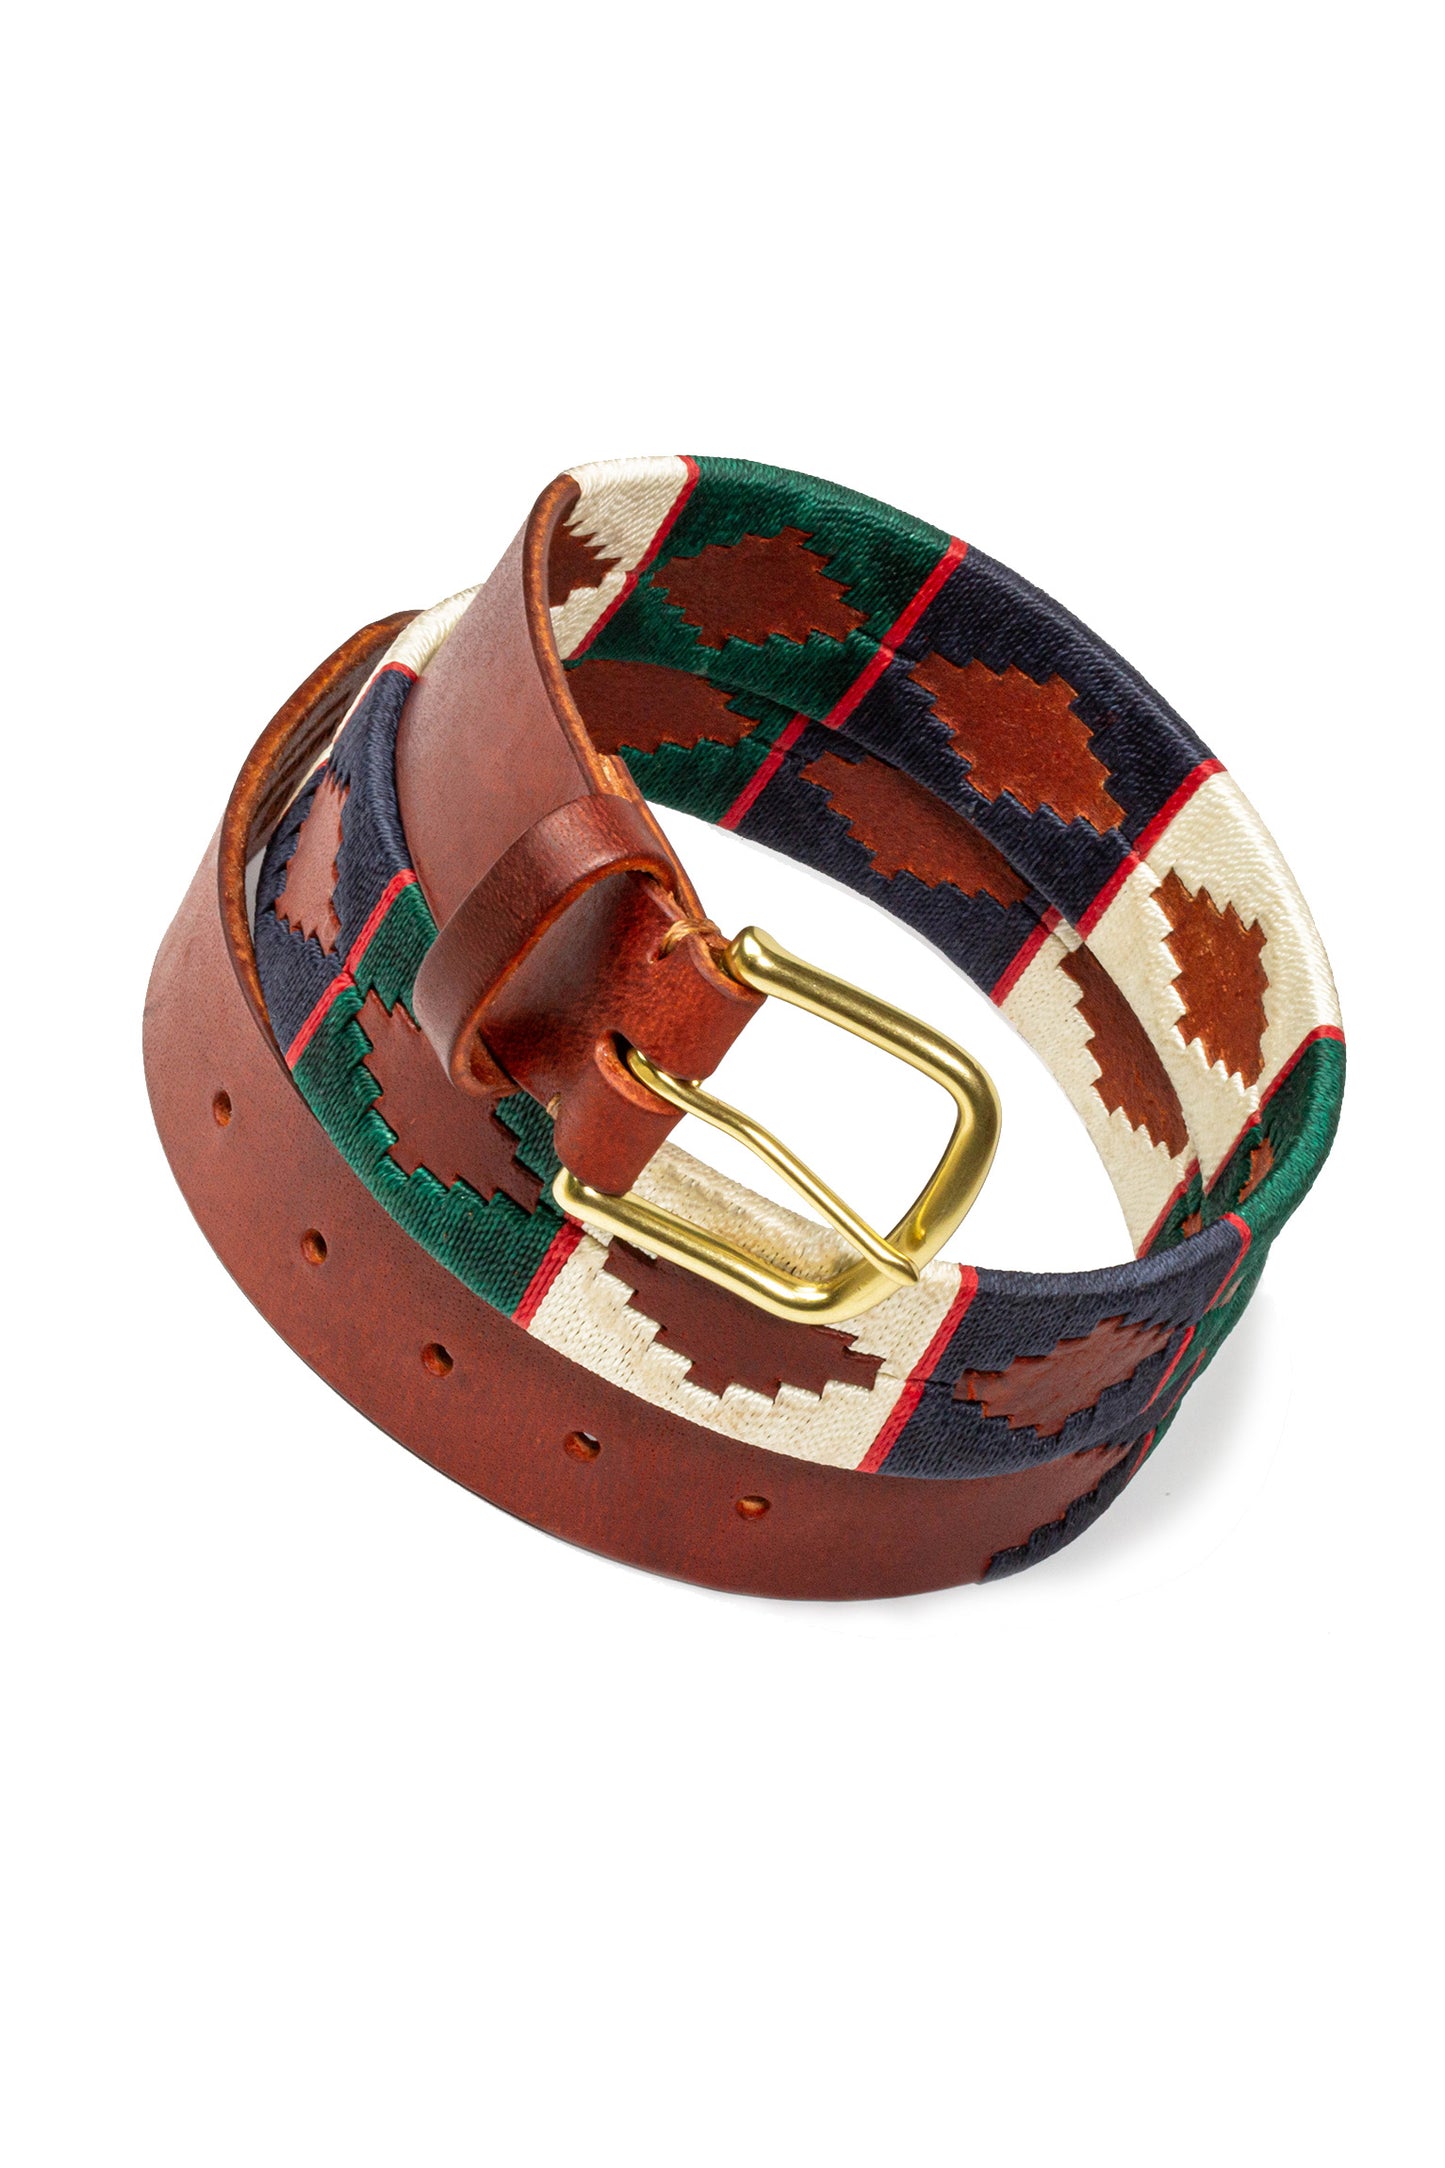 Circus Leather Handcrafted Belt